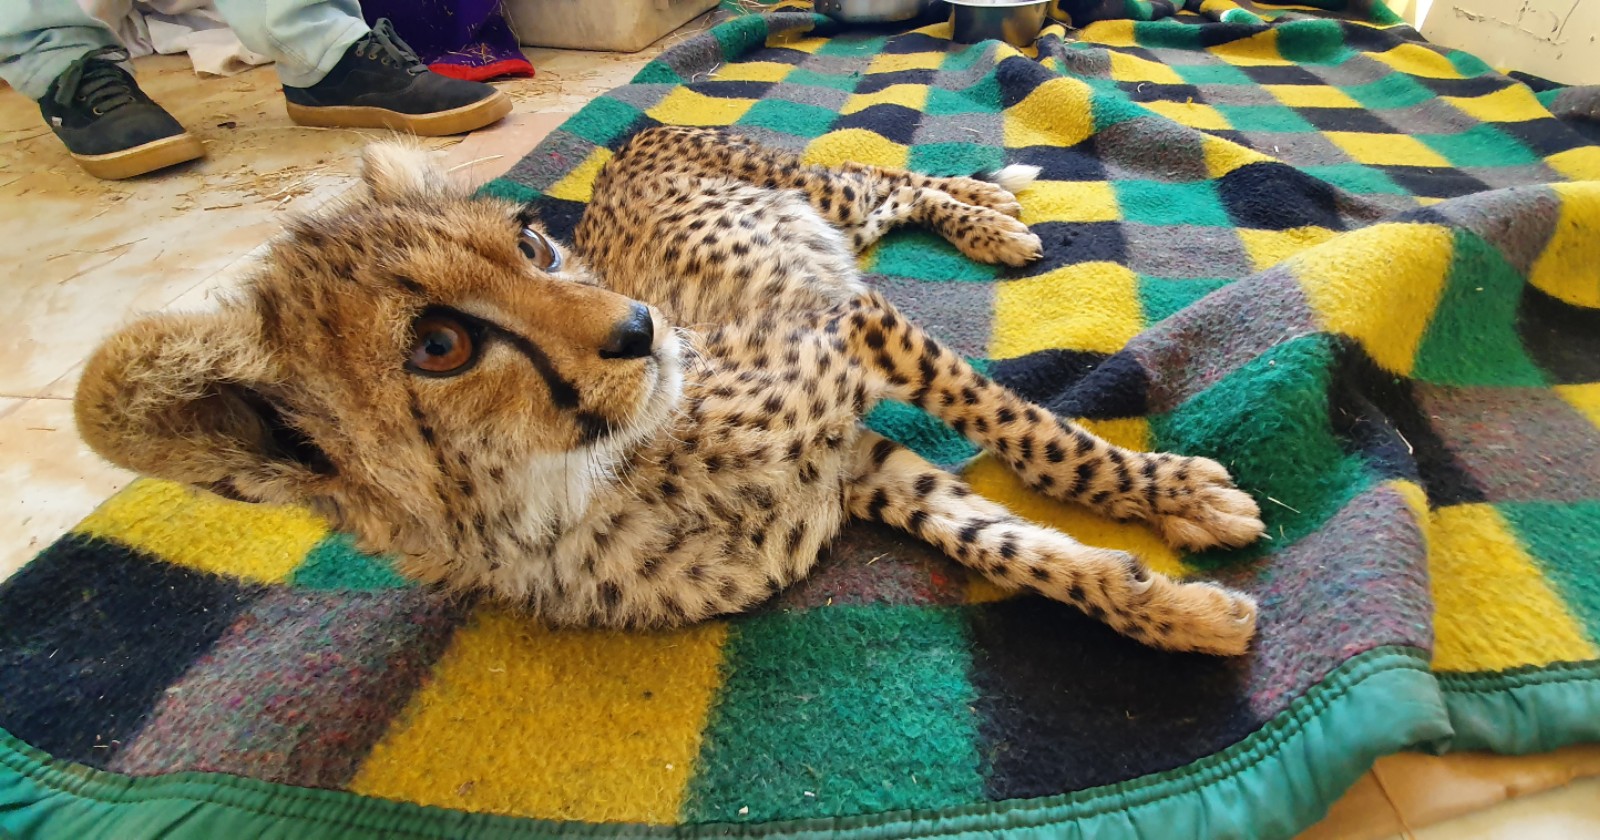 A photo of a young cheetah lying on a green, black and yellow patterned blanket.